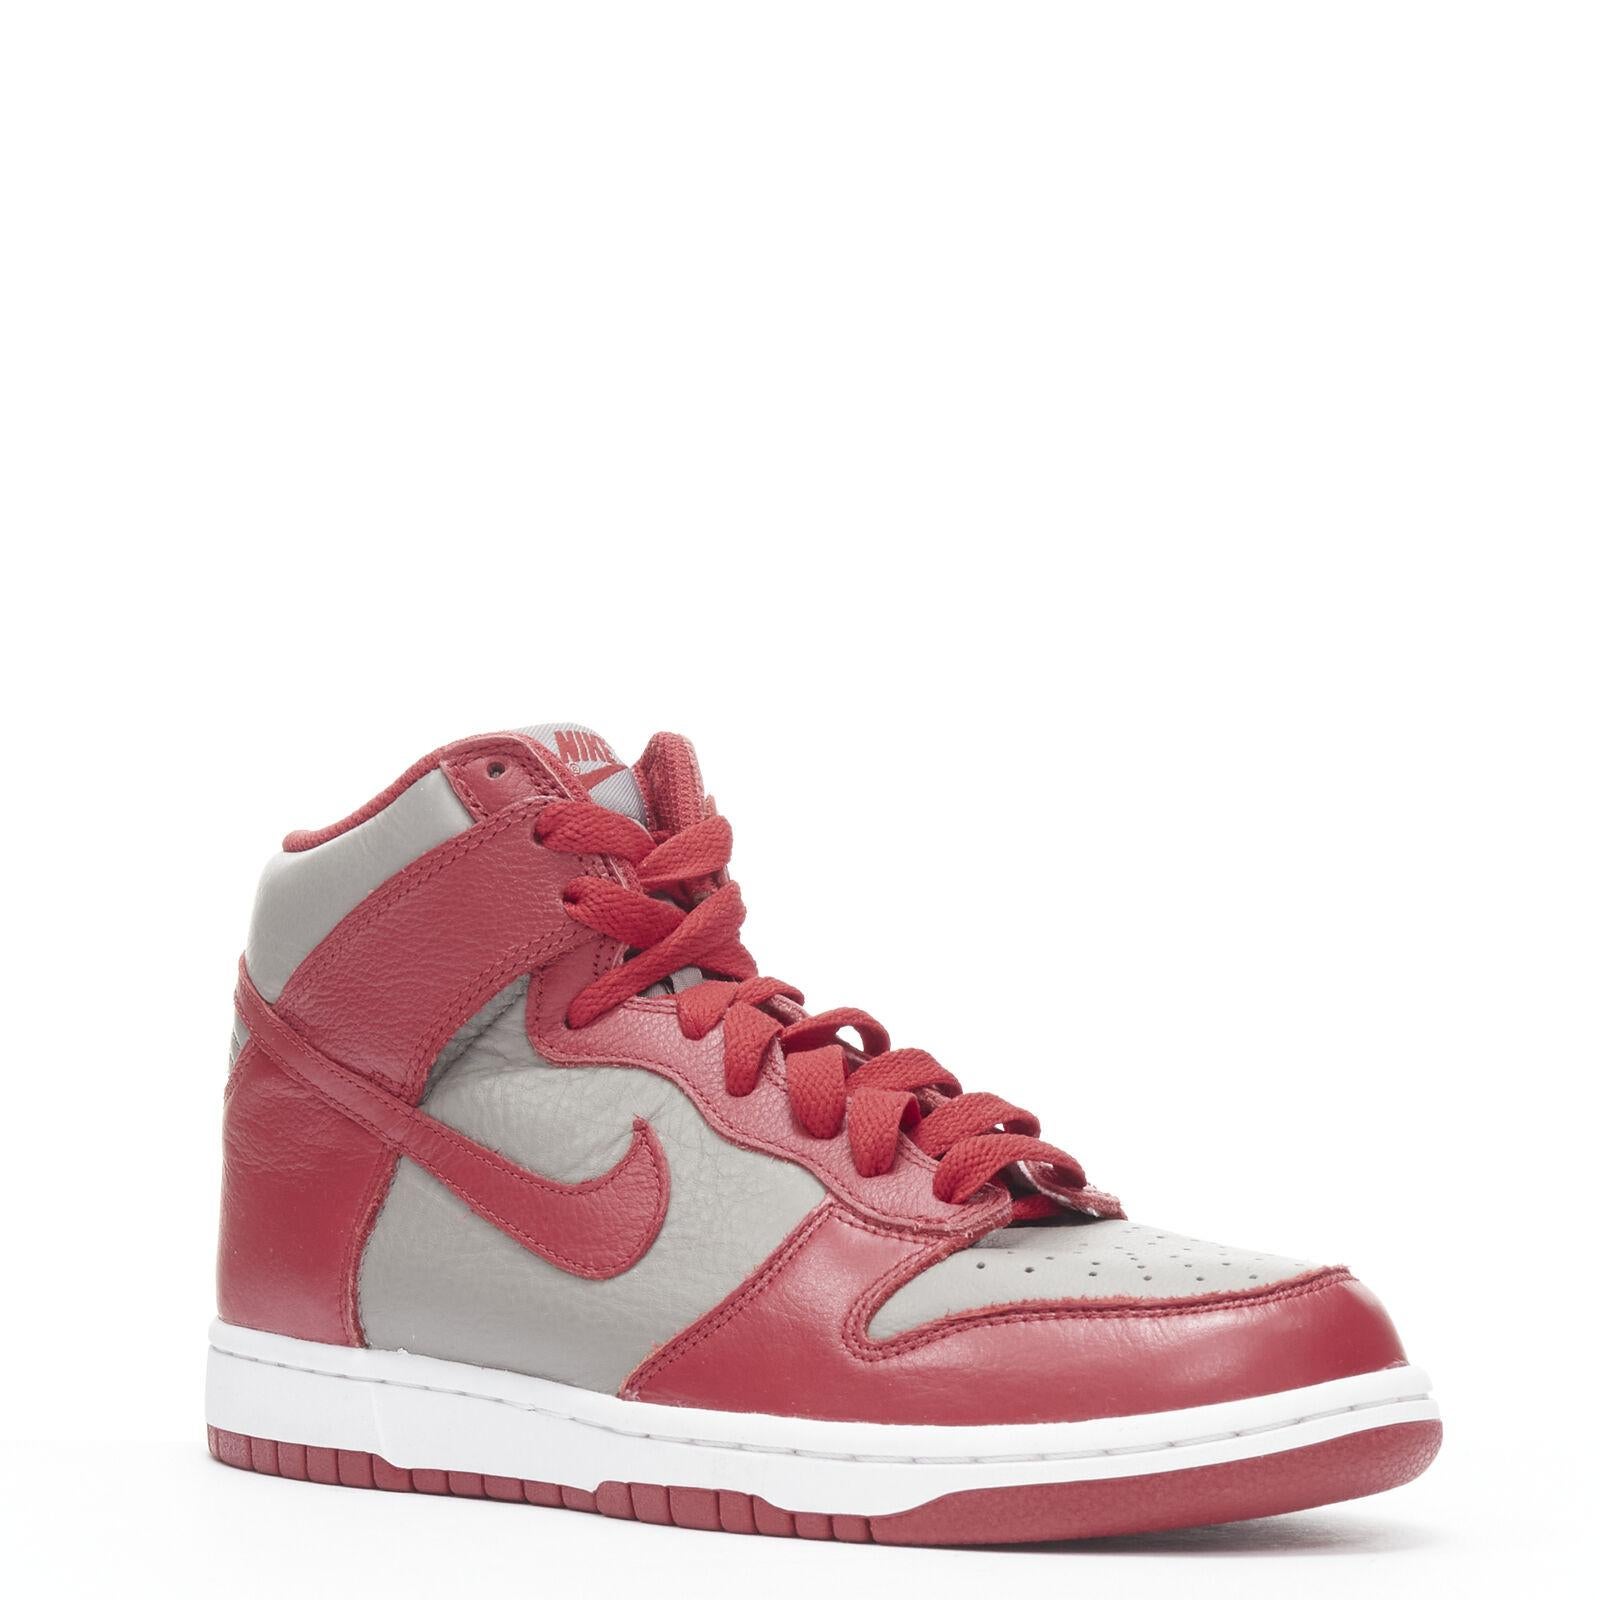 NIKE Dunk High UNLV soft grey university red high top dunk sneaker US8 EU38
Reference: TGAS/B01143
Brand: Nike
Model: Dunk High UNLV
Material: Leather
Color: Grey, Red
Pattern: Solid
Closure: Lace Up
Made in: Vietnam

CONDITION:
Condition: